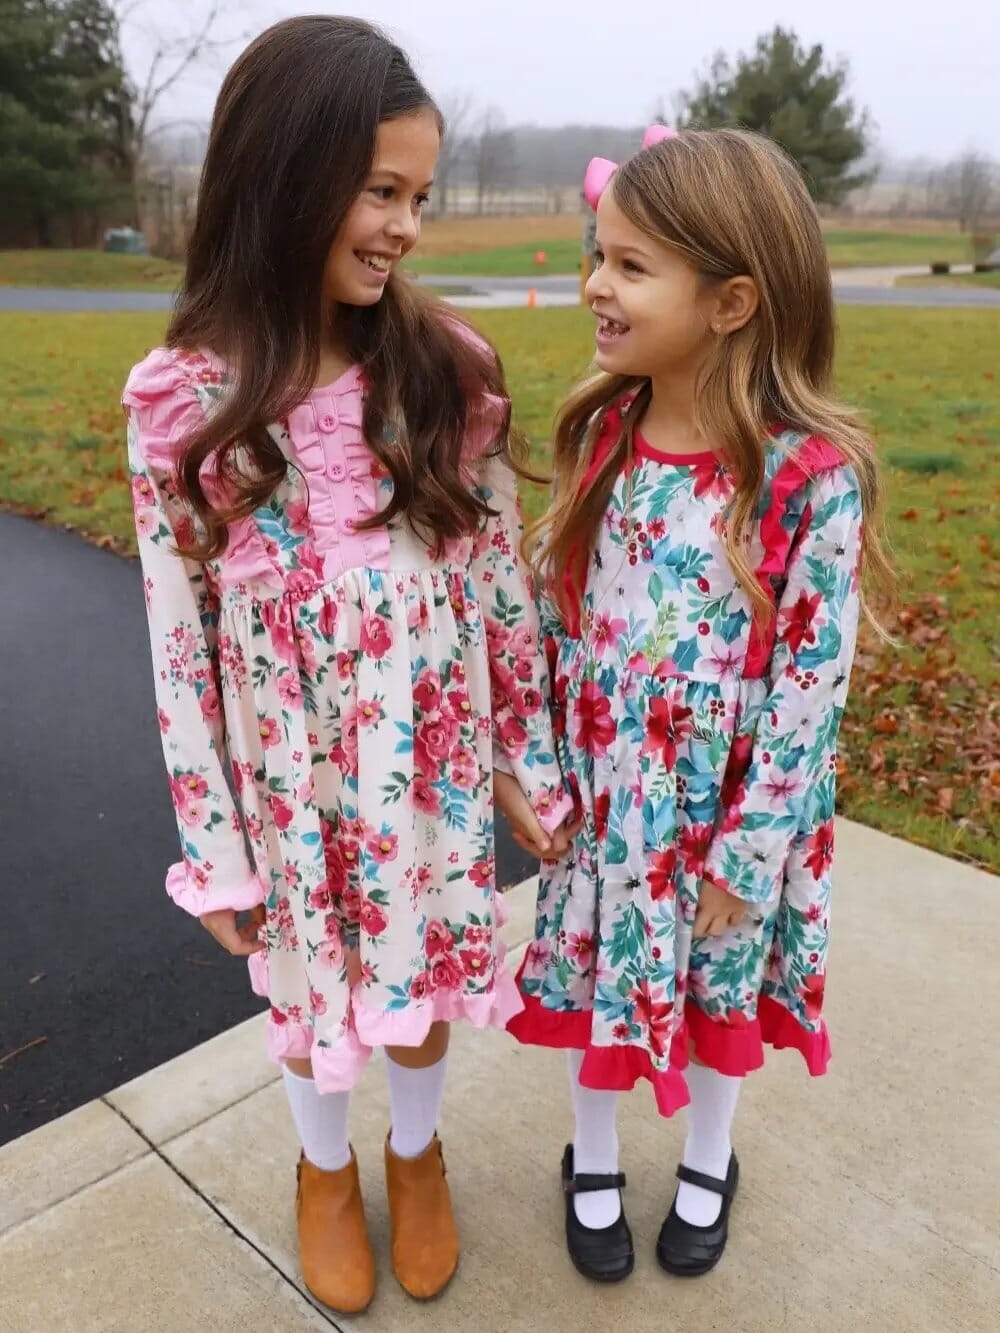 Matching Outfits for Girls, Matching Sister Outfits, Matching Sibling Outfits